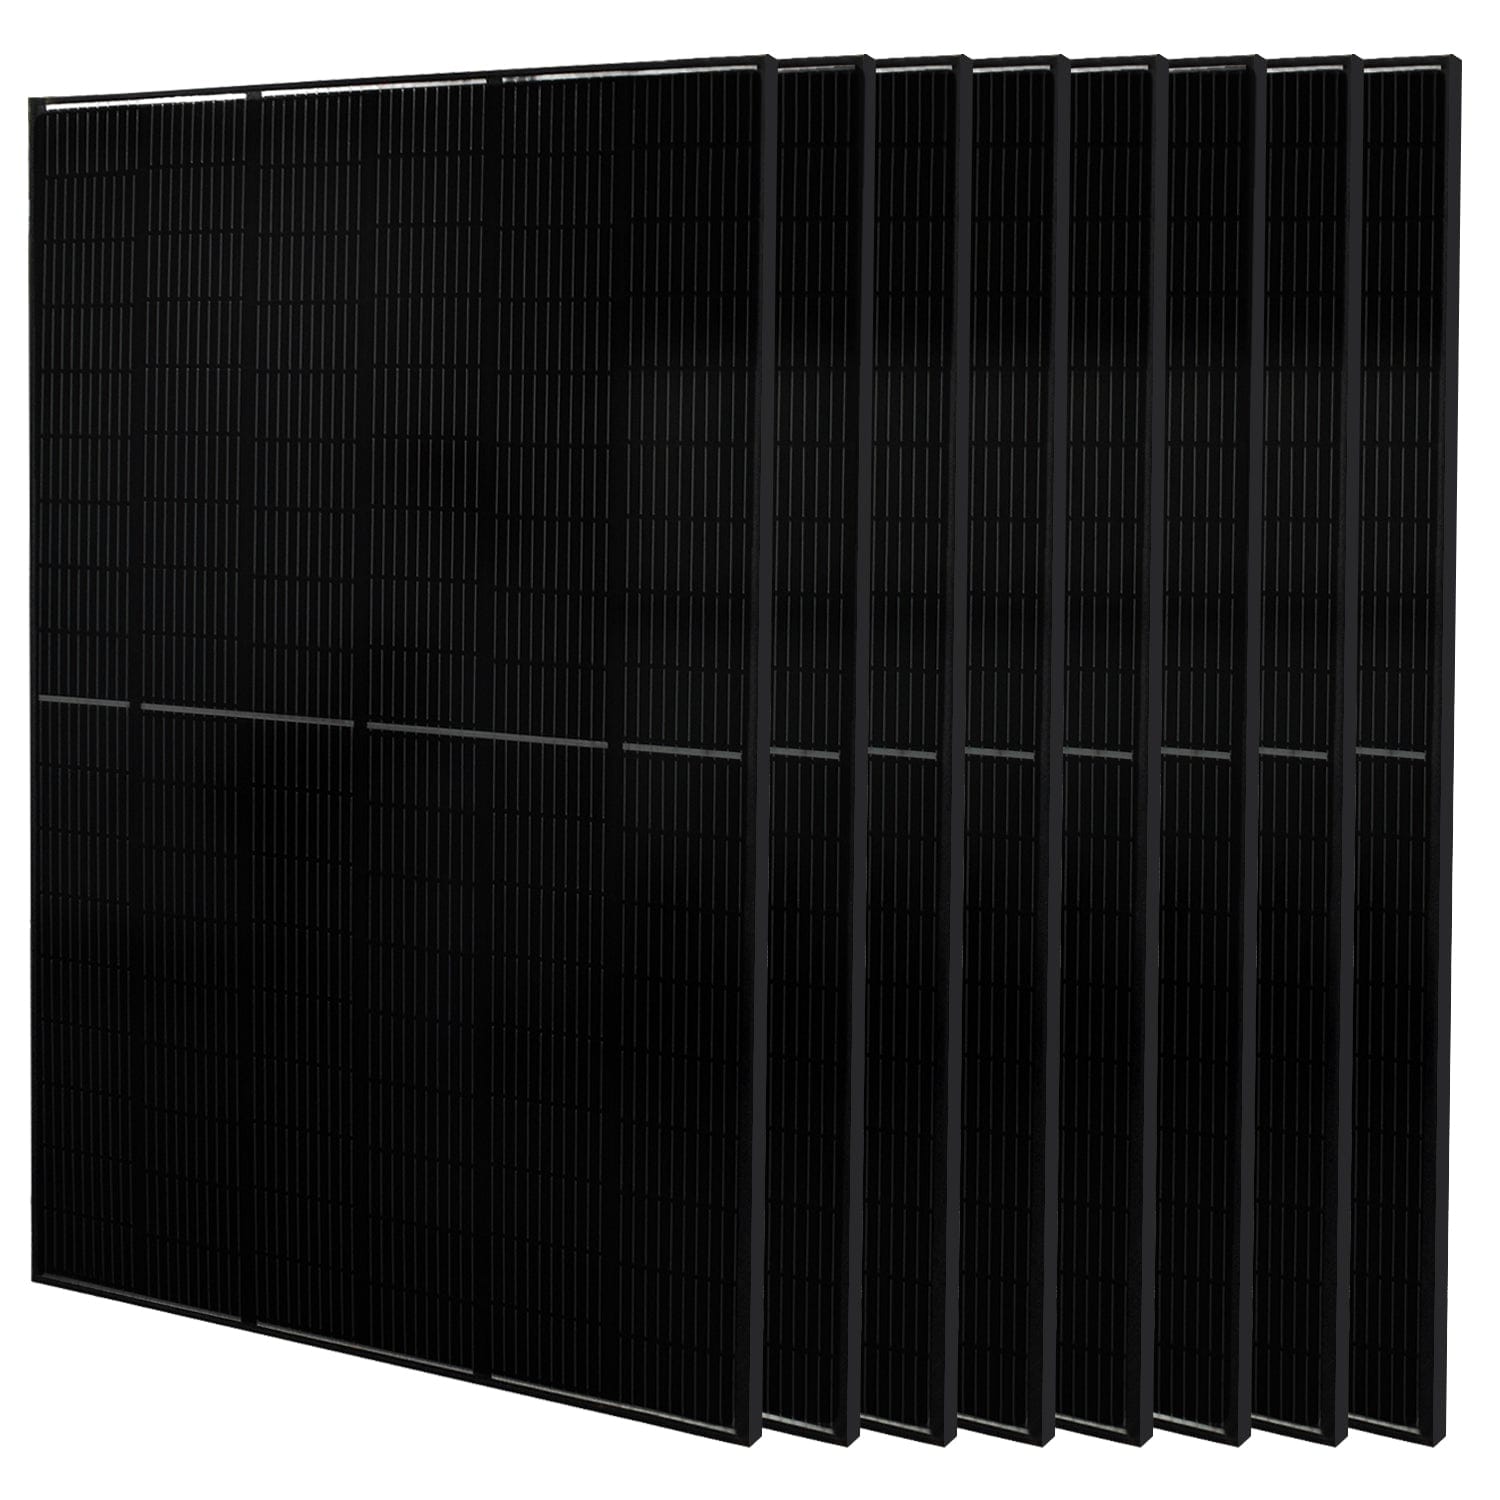 Nature's Generator Powerhouse Power Panels Side View 8 Pack